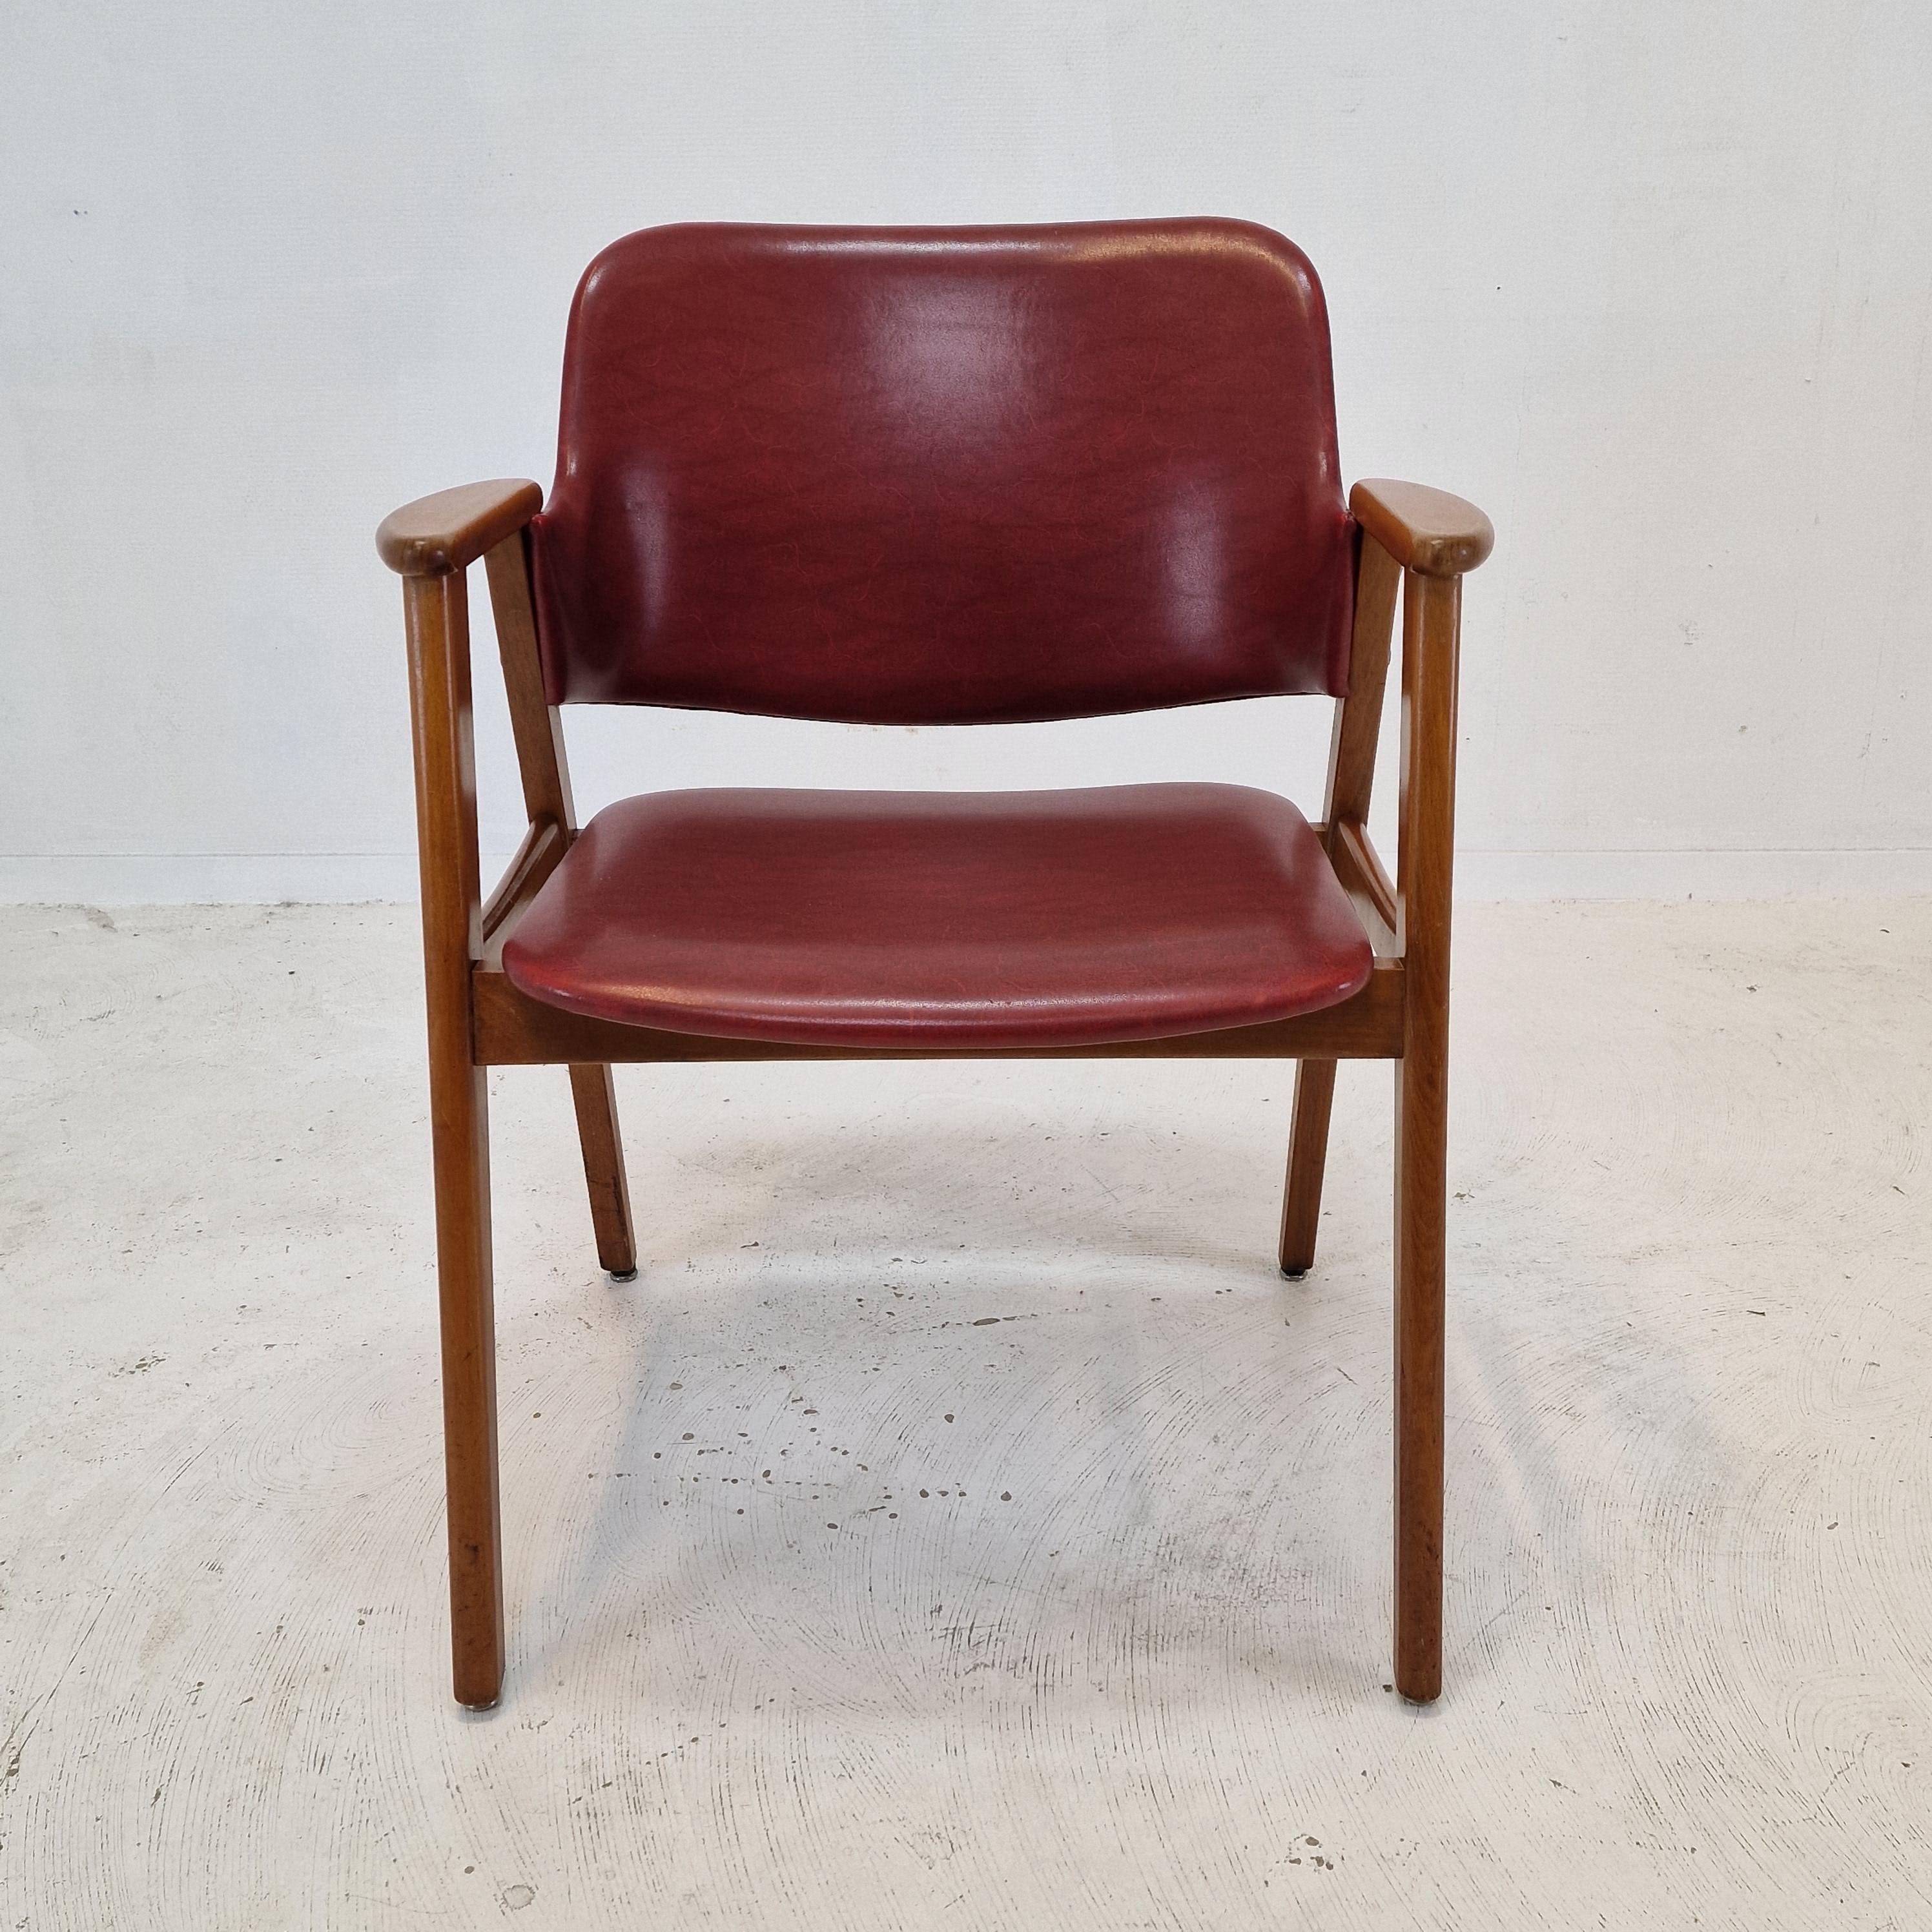 Mid-20th Century Midcentury Dining or Restaurant Chairs by Cees Braakman for Pastoe, 1950s For Sale